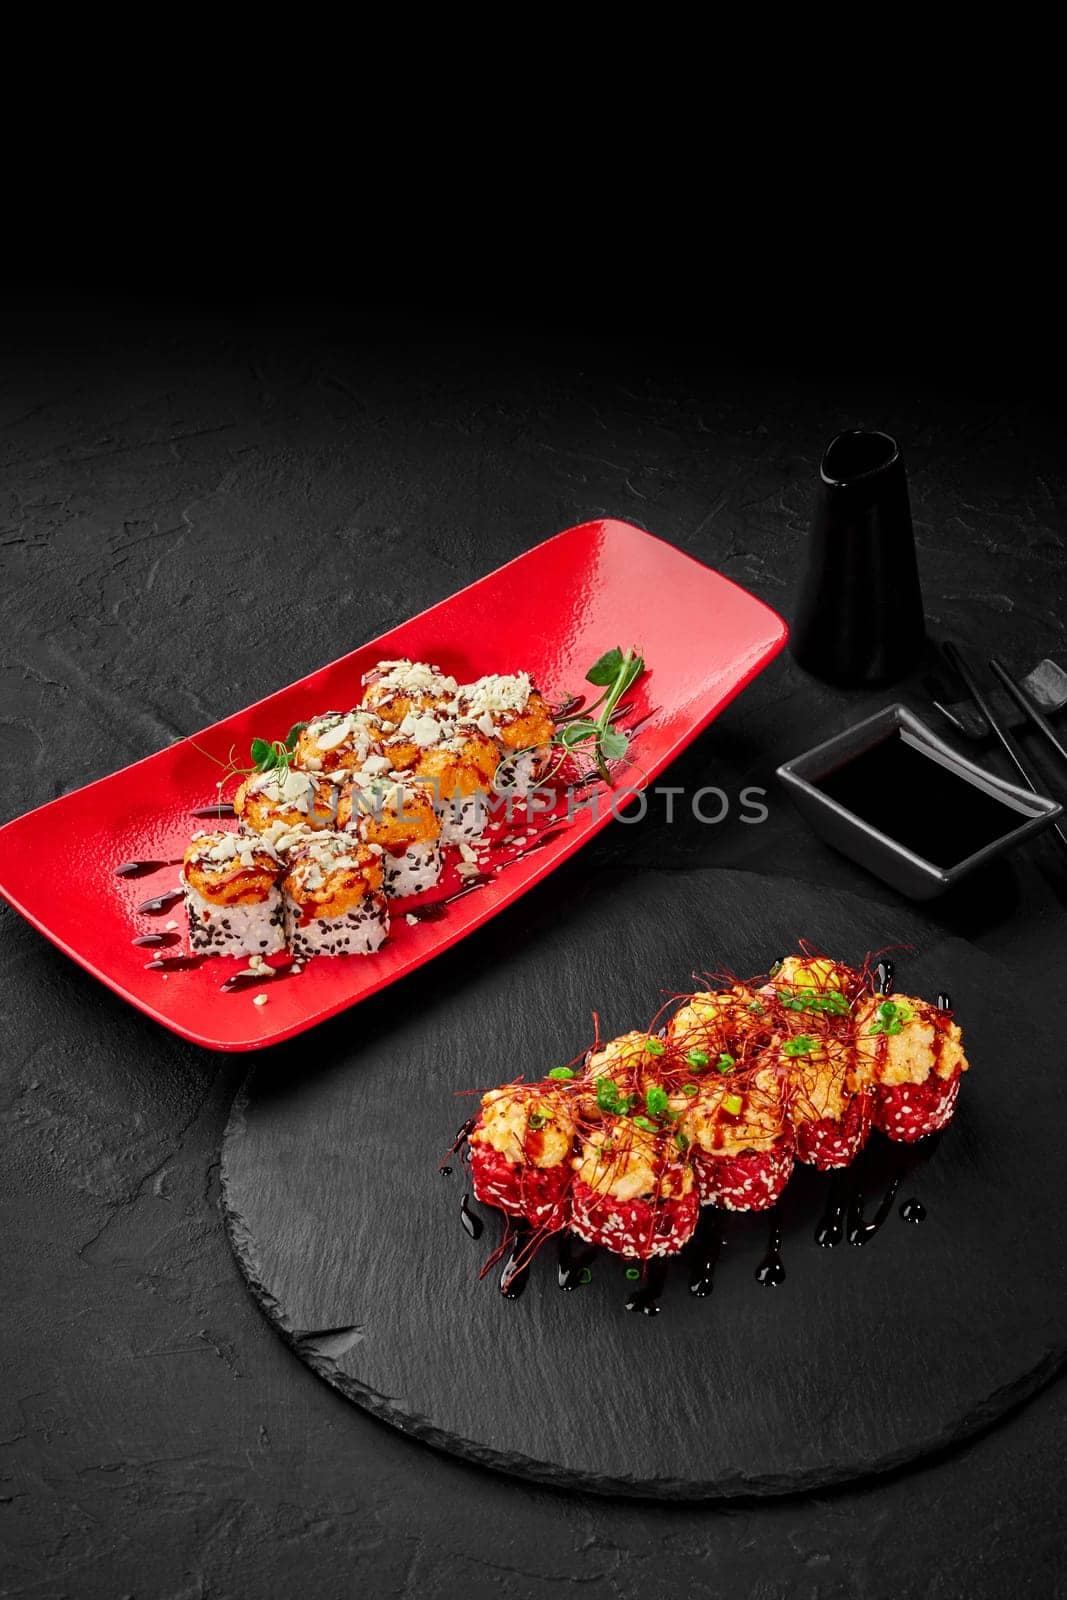 Elegant presentation of two kinds of sushi rolls with seared cheese and seafood caps served of on striking red plate and black slate, traditionally accompanied by soy sauce and chopsticks